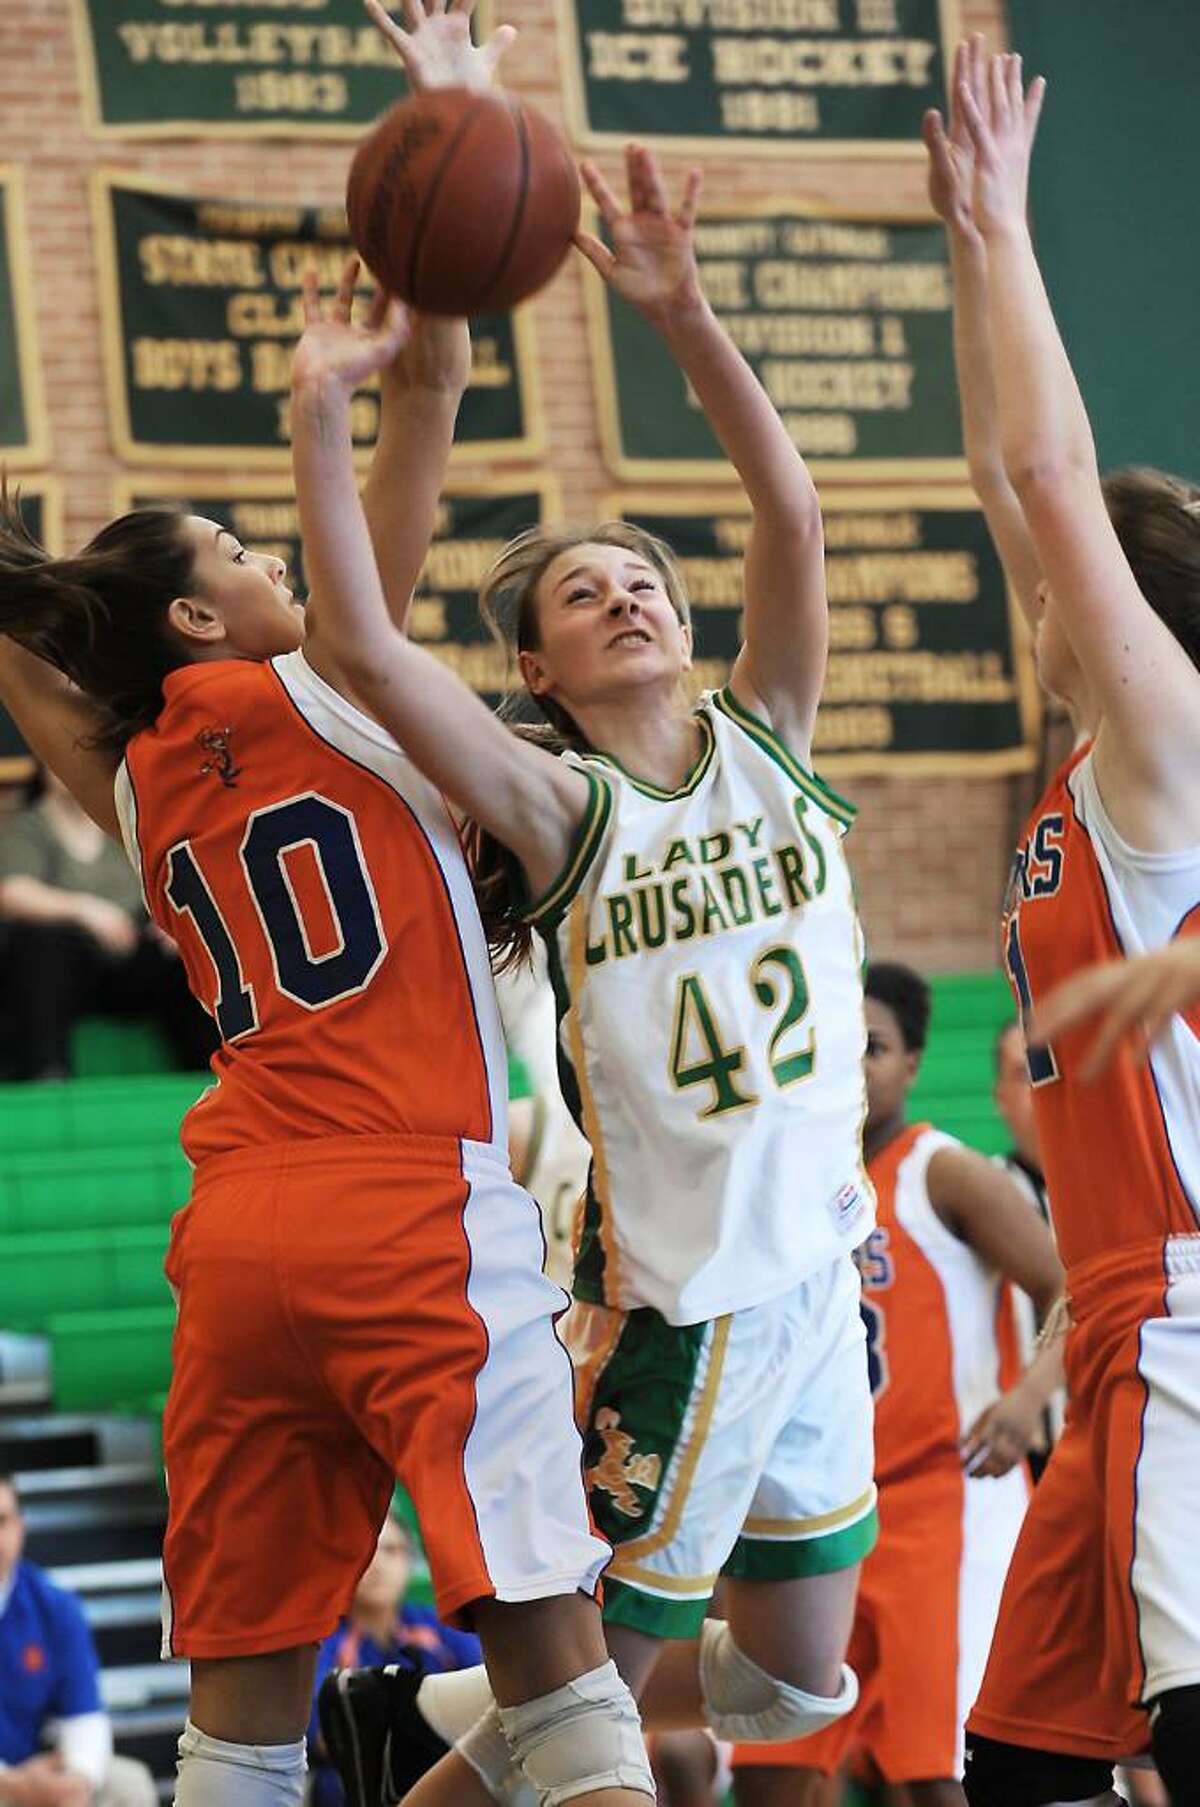 Trinity Catholic's Mackenzie Griffin goes up for a shot against Danbury's Casey Smith in the quarterfinals of the FCIAC girls basketball championship in Stamford, Conn. on Saturday, Feb. 20, 2010.